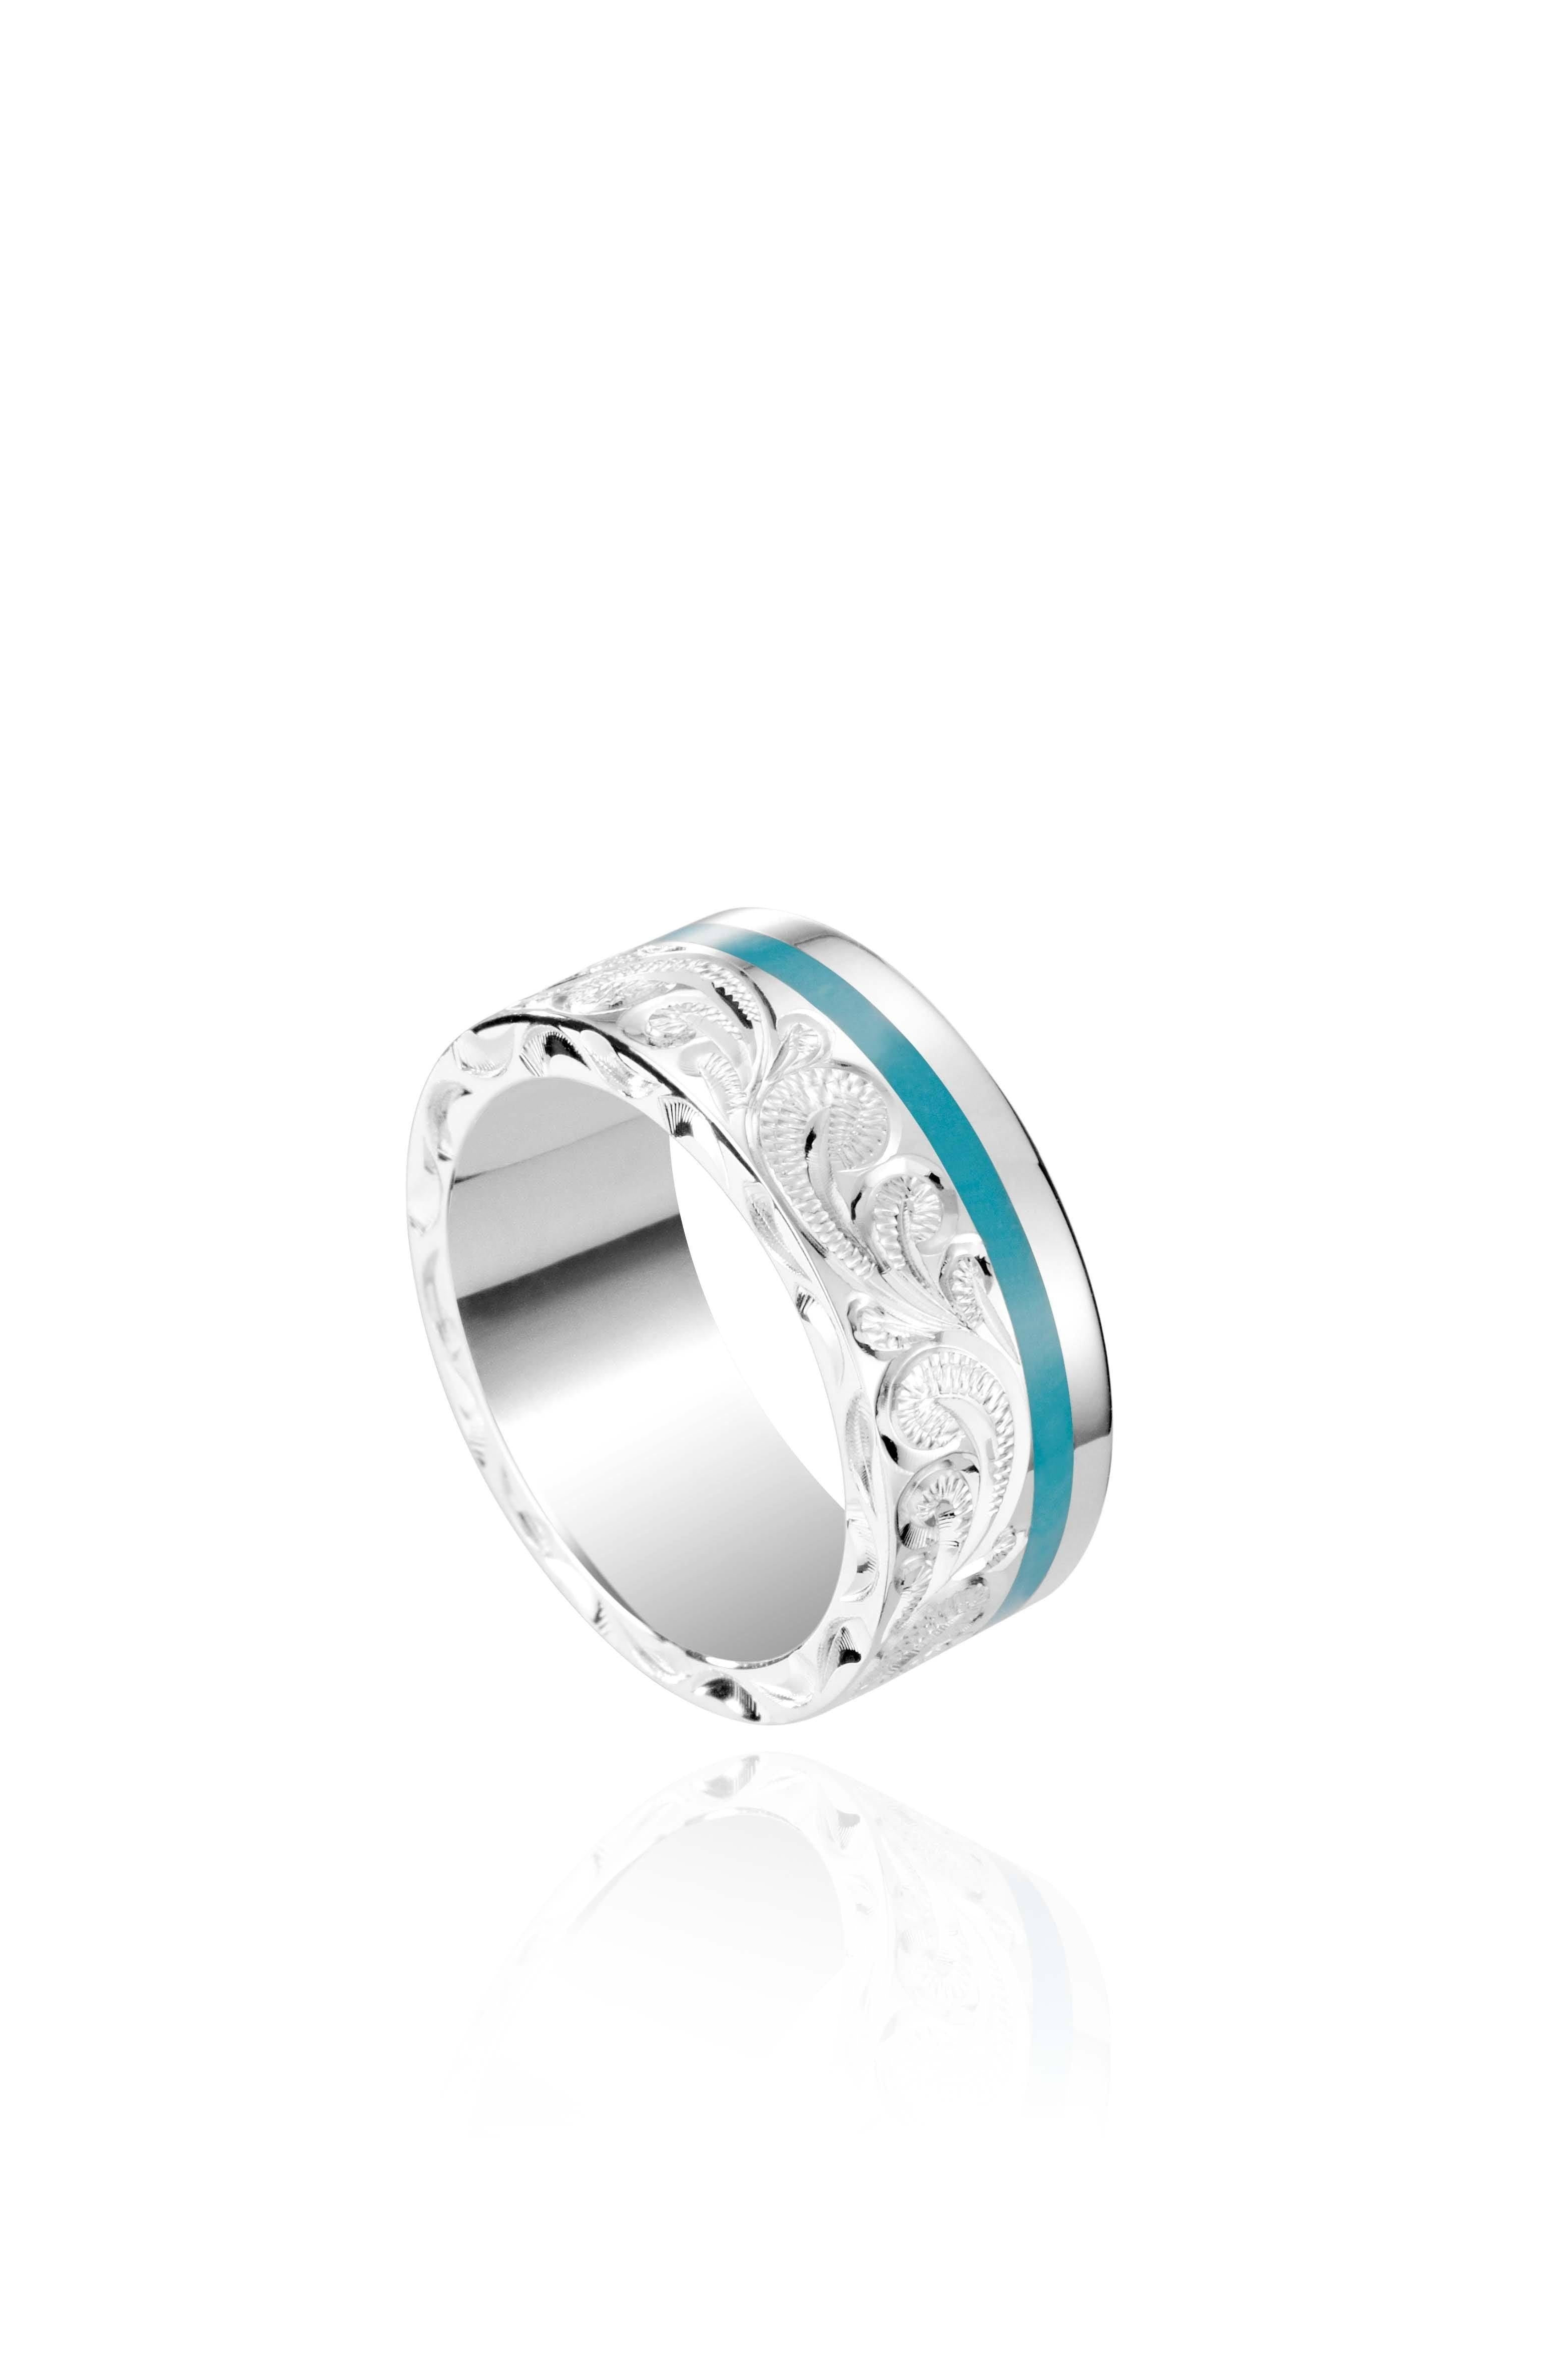 The picture shows a 925 sterling silver and turquoise wave channel ring with hand engravings.